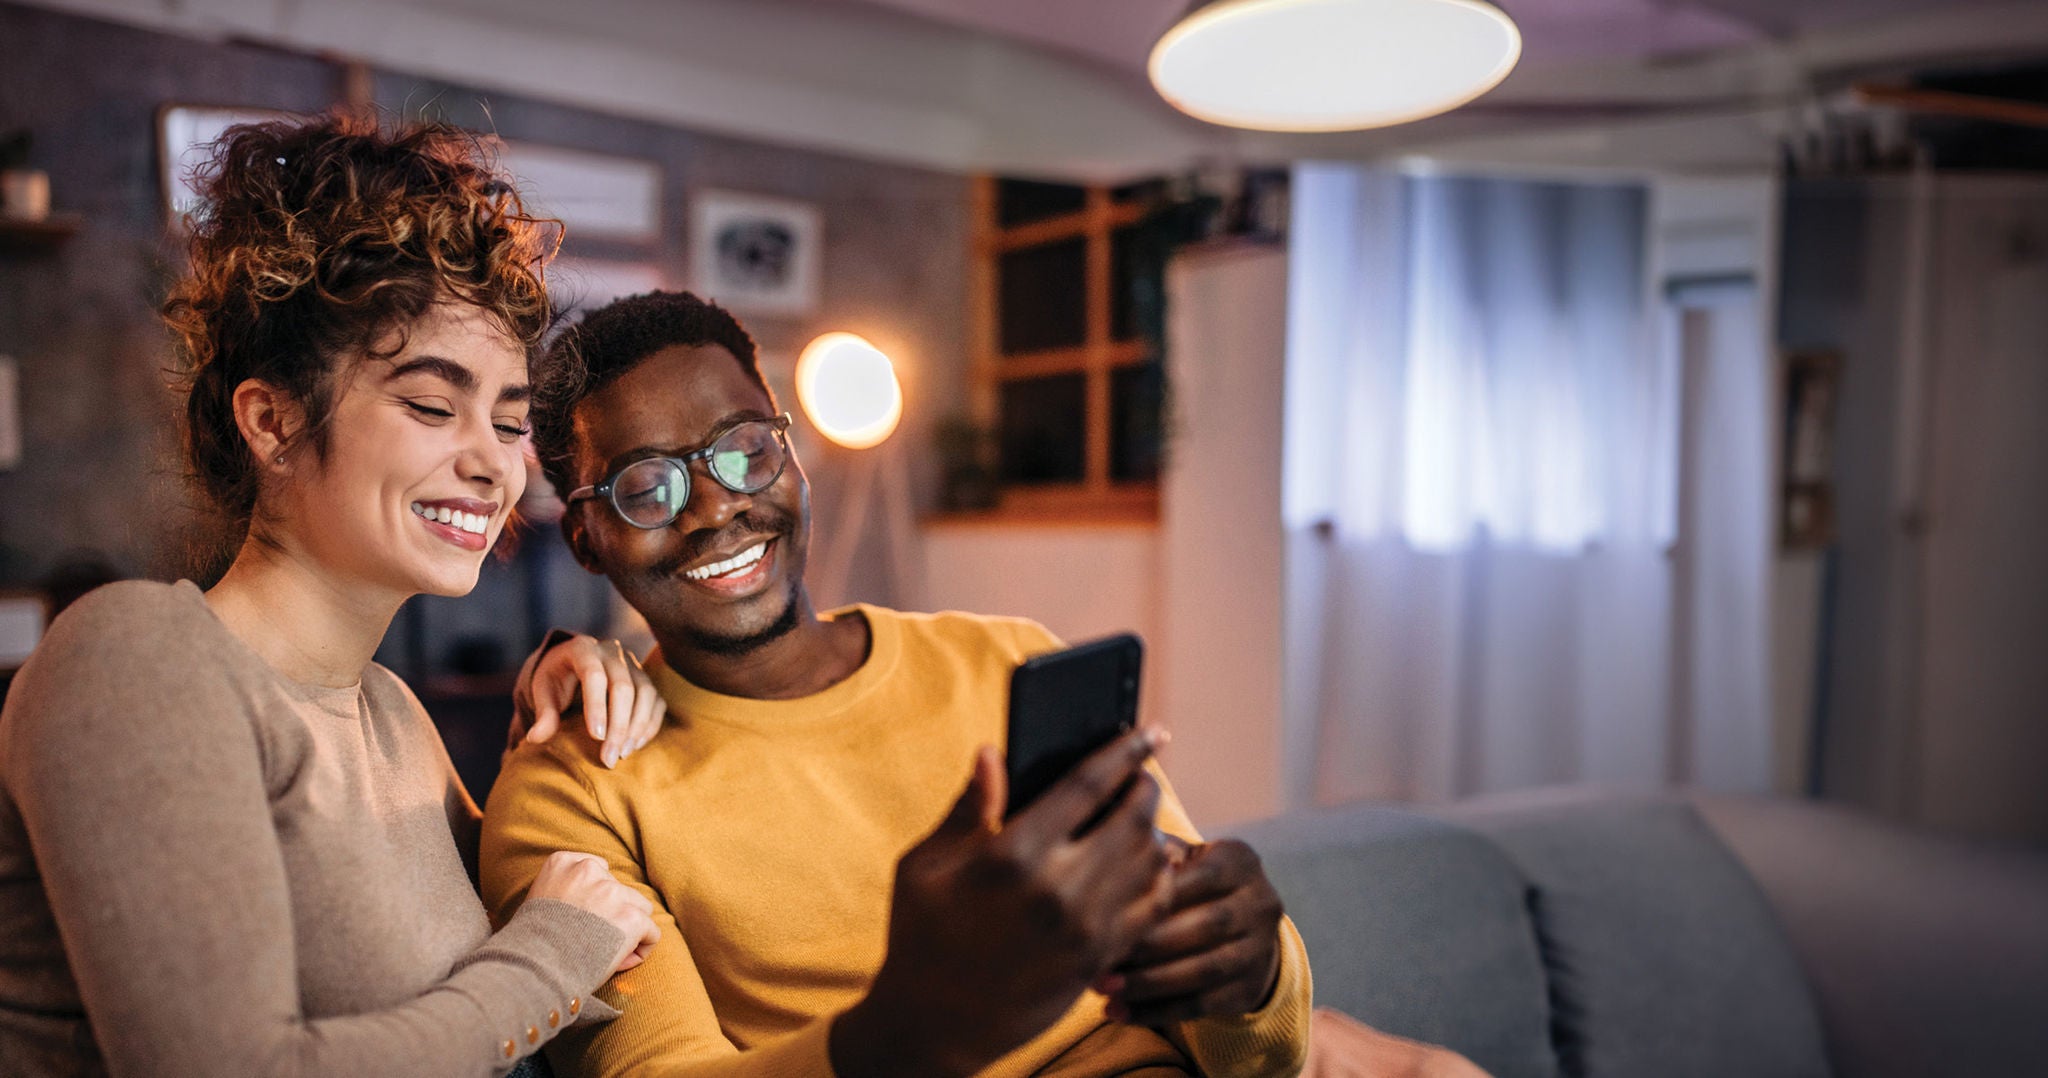 Two people sitting close together on a couch, looking at a smartphone in a warmly lit living room.